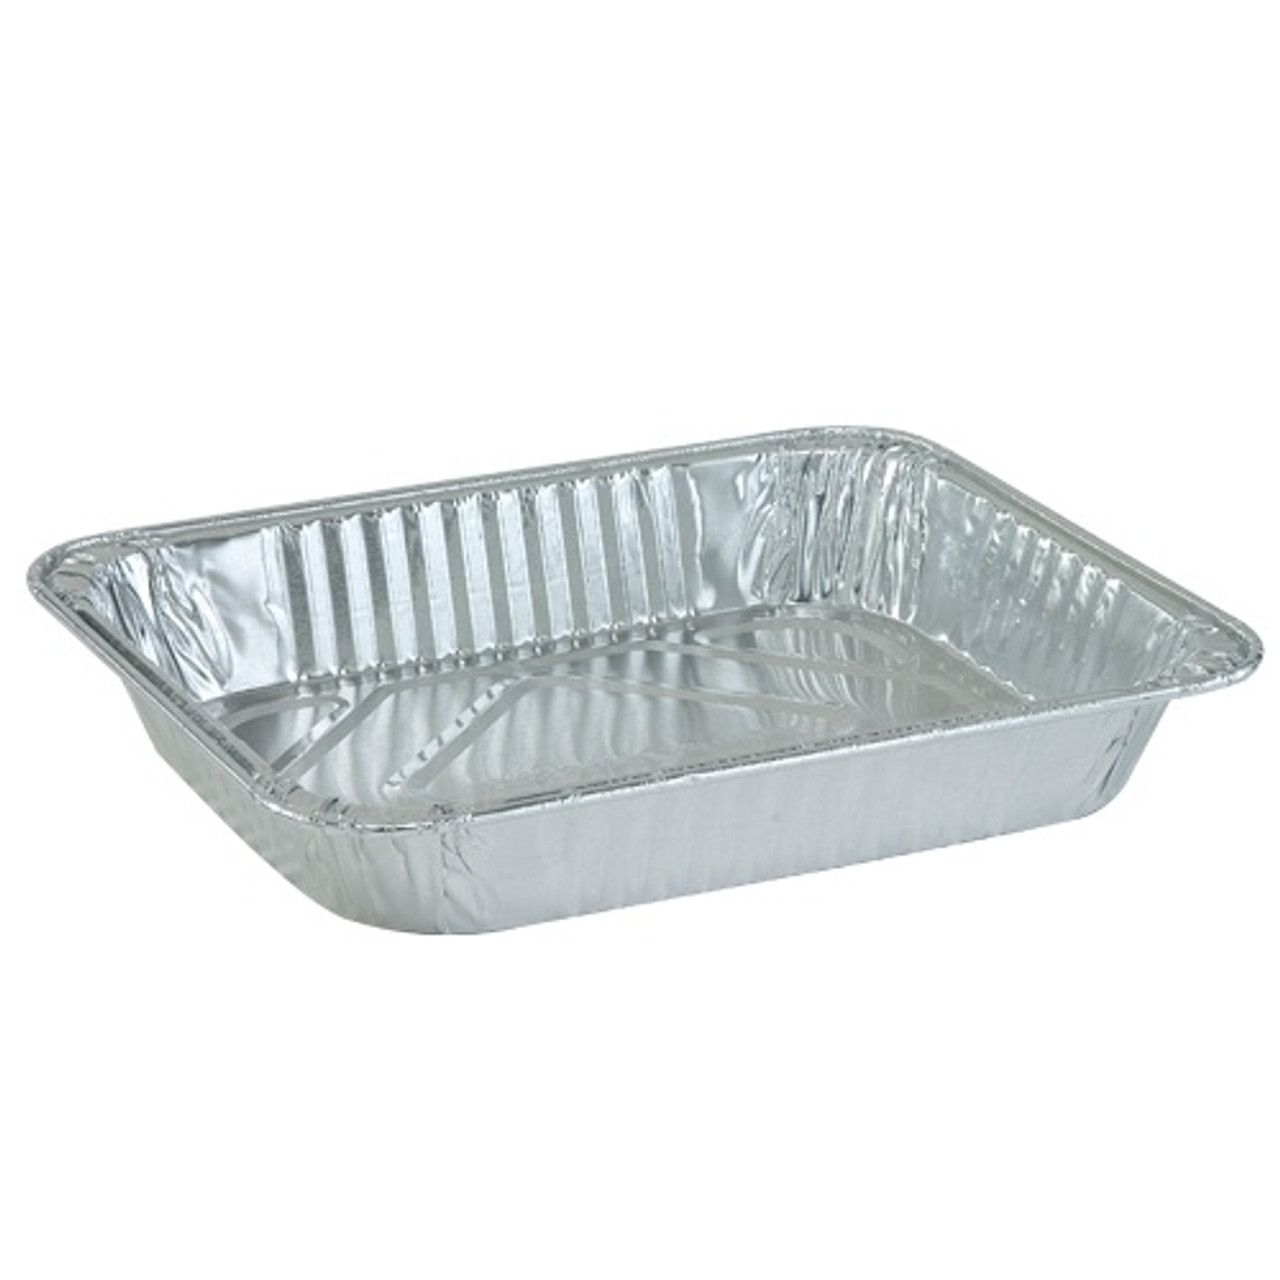 https://cdn11.bigcommerce.com/s-hgqmwywp99/images/stencil/1280x1280/products/49291/44082/9-x-13-lasagna-aluminum-baking-pans-250ct-3__03171.1675880317.jpg?c=1?imbypass=on